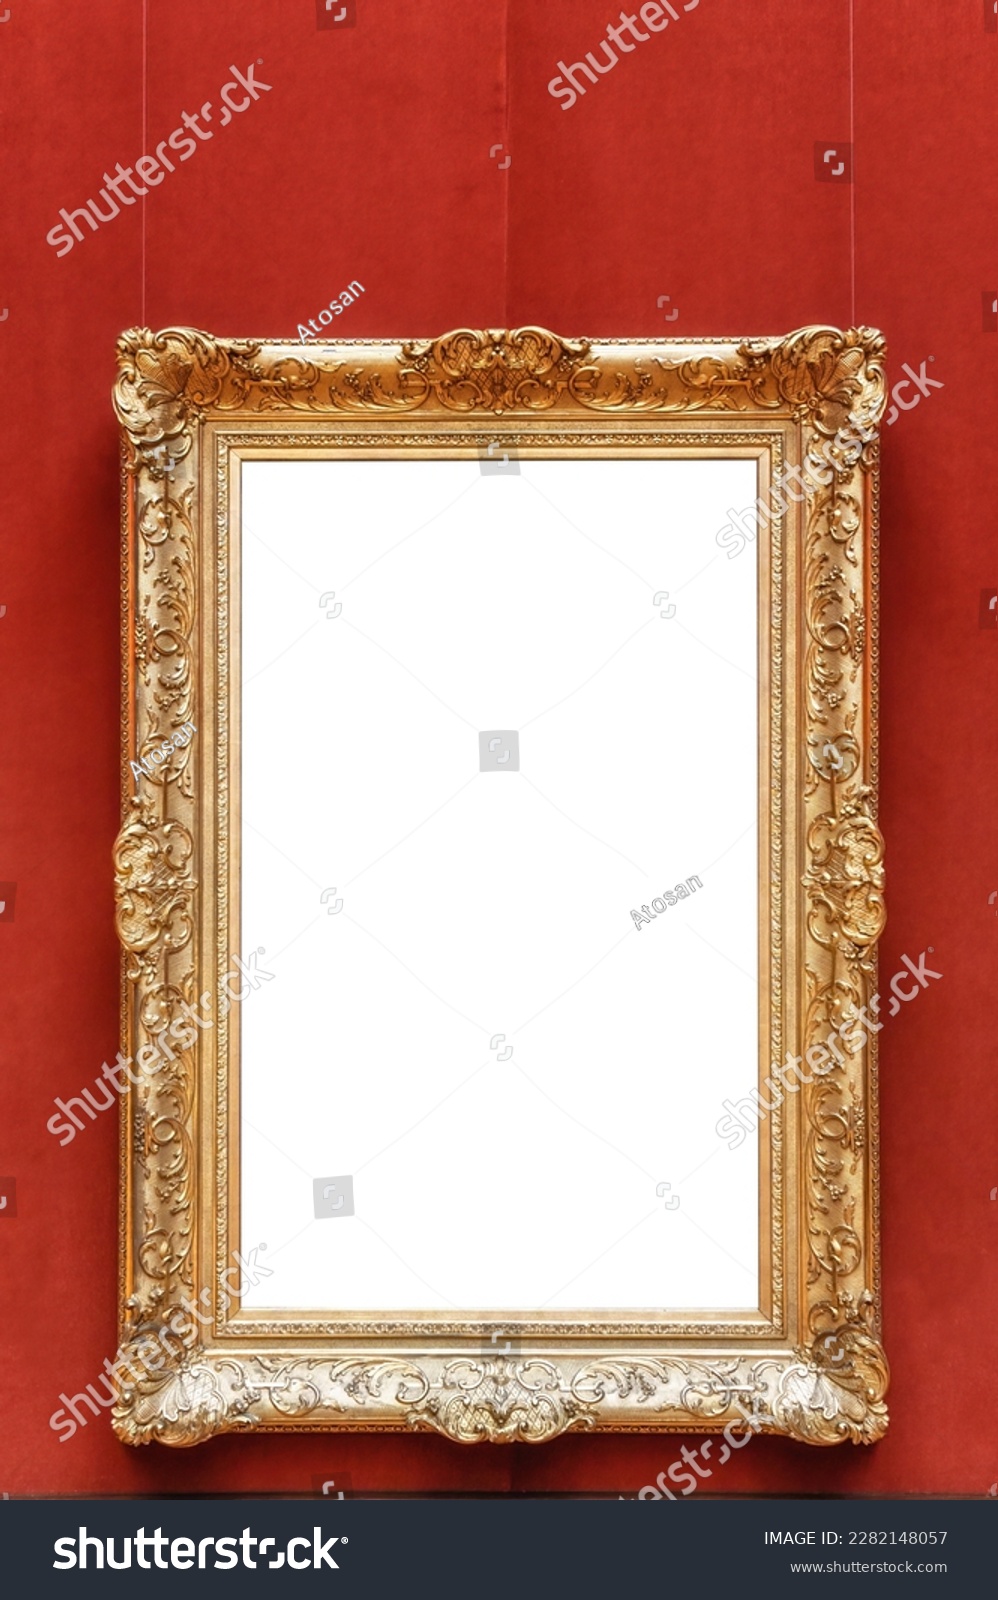 Antique art fair gallery frame on royal Red wall at auction house or museum exhibition, blank template with empty white copyspace for mockup design, artwork concept #2282148057